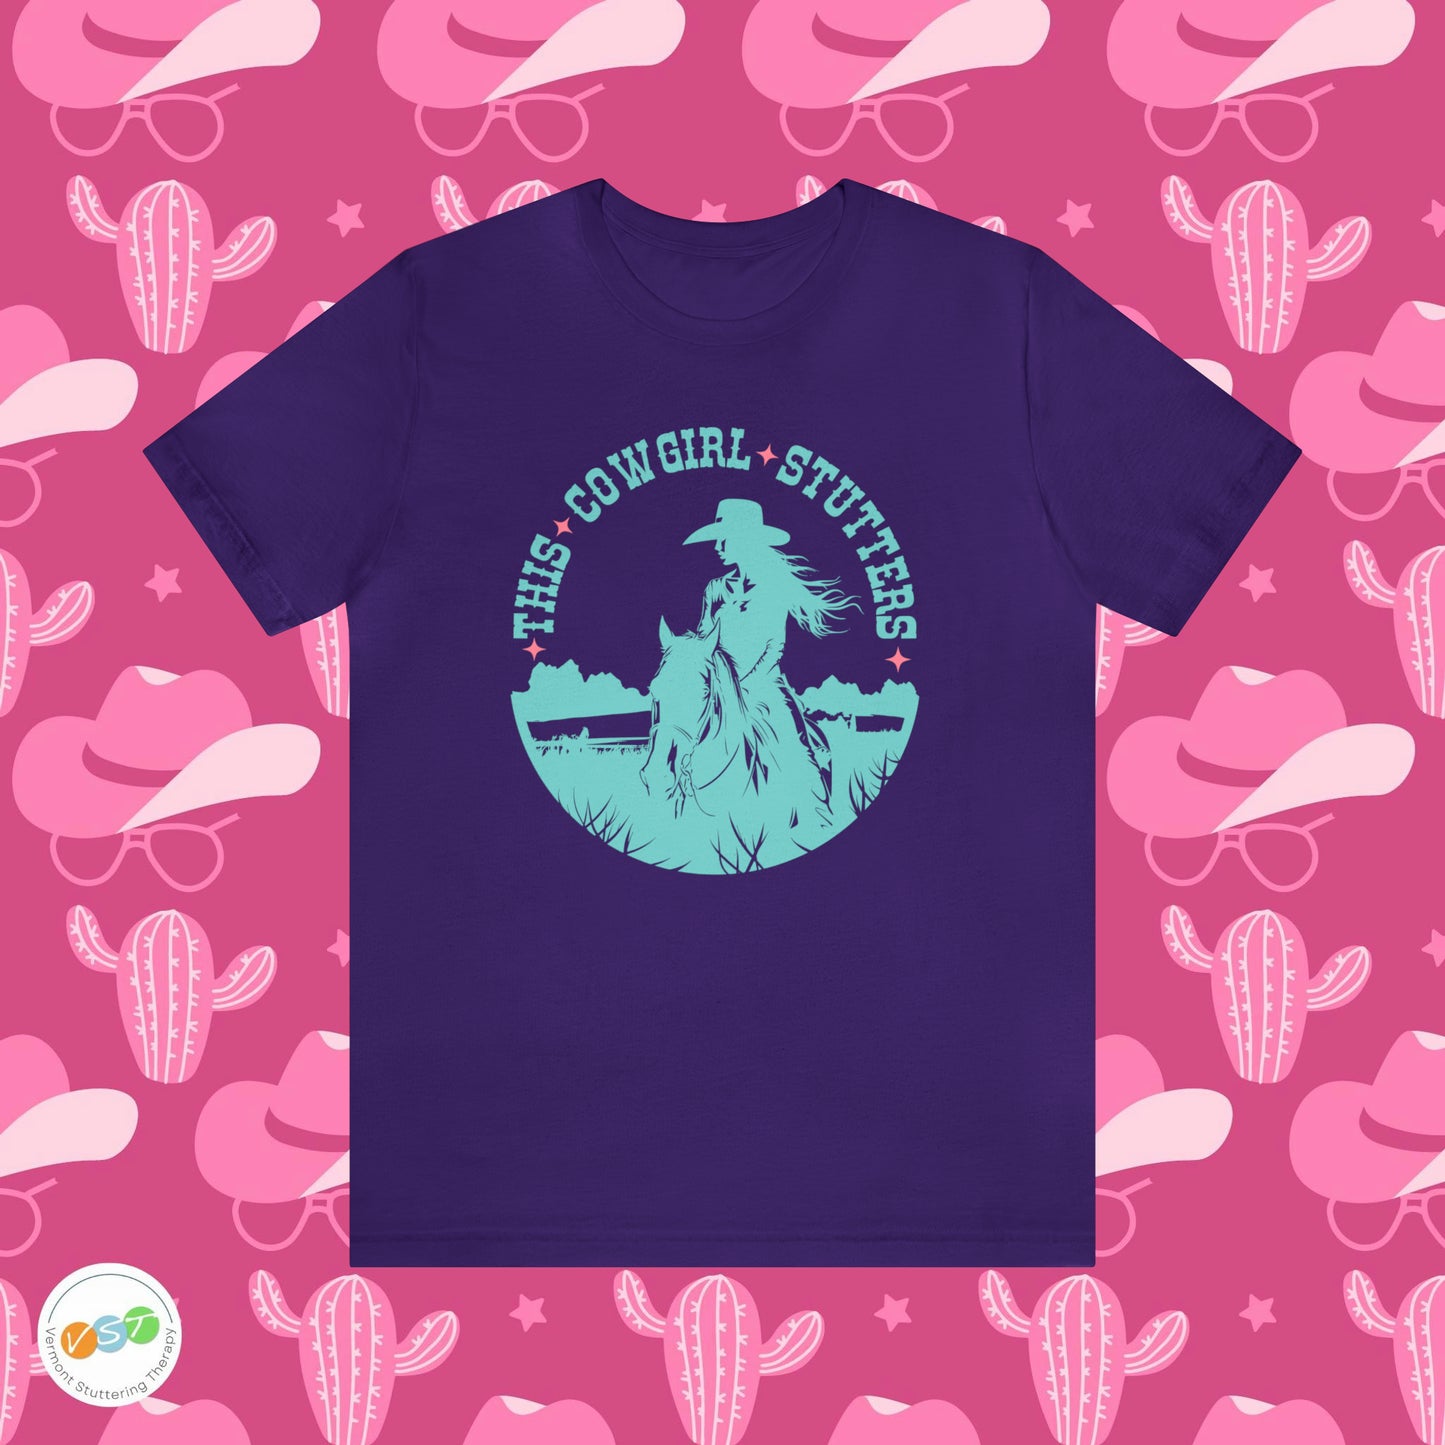 Coastal Cowgirl Stuttering T-shirt for Person Who Stutters